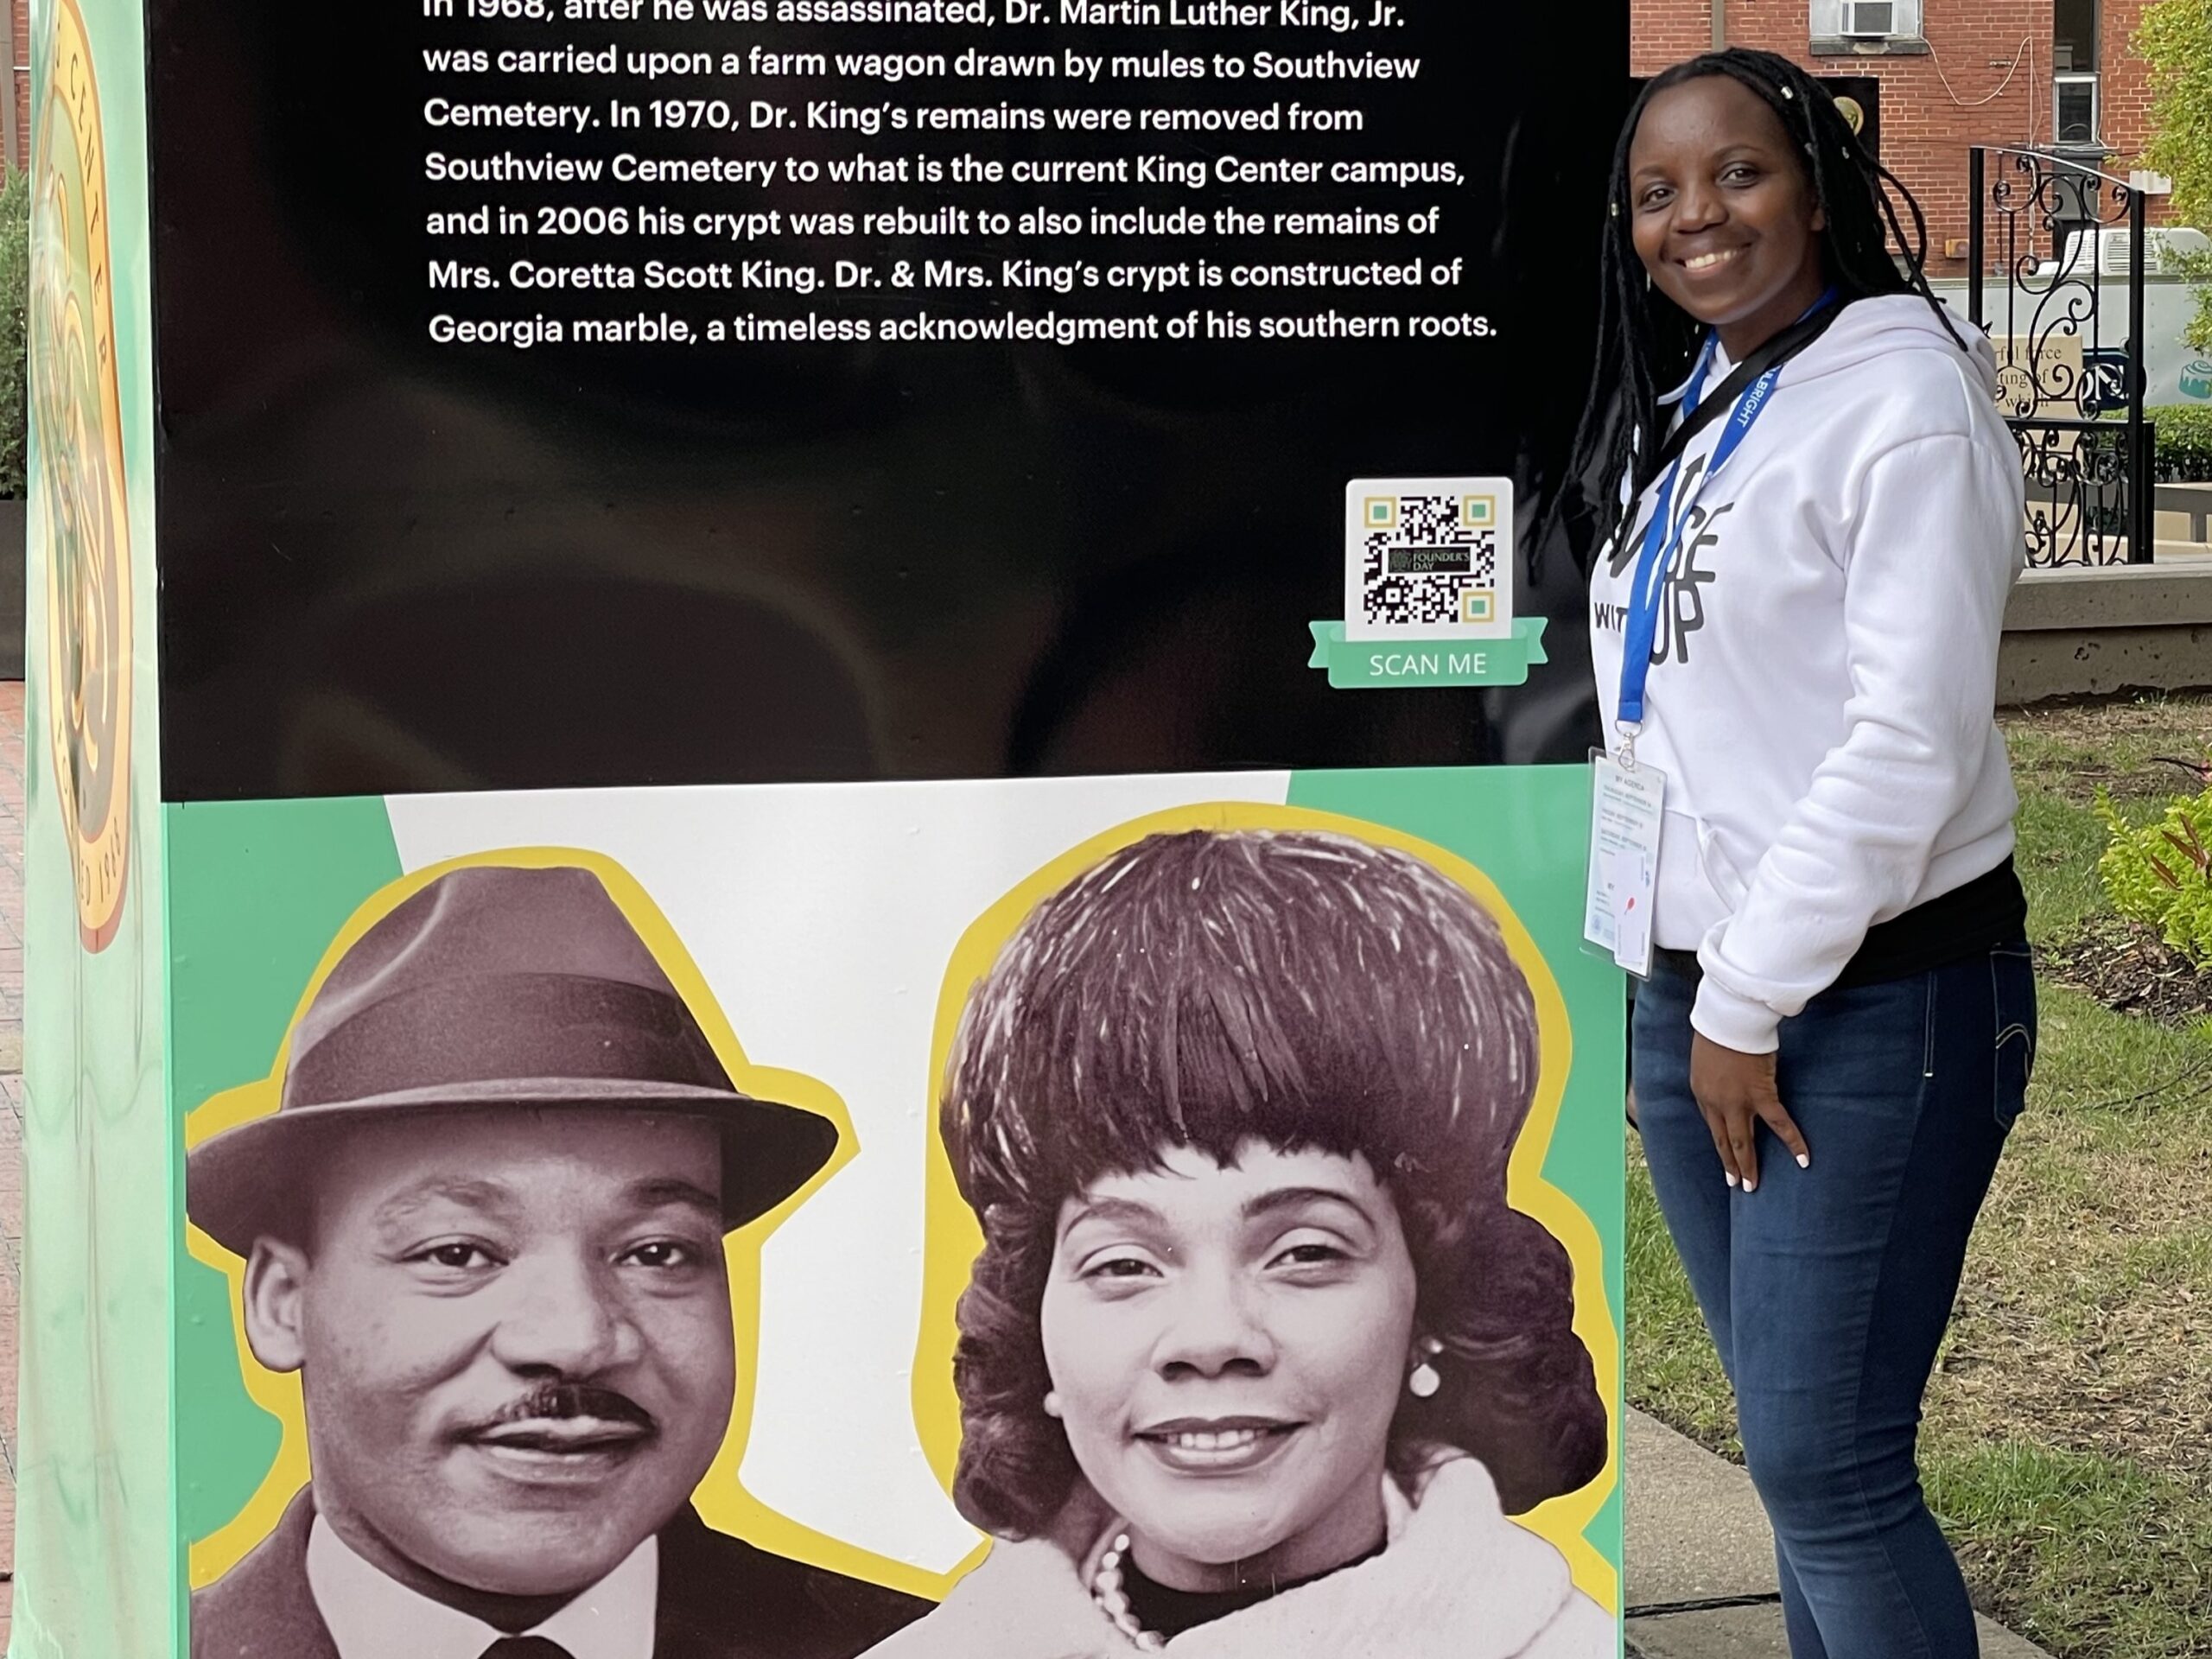 Fulbrighters Honor the Legacy of Martin Luther King, Jr. through Volunteer Service